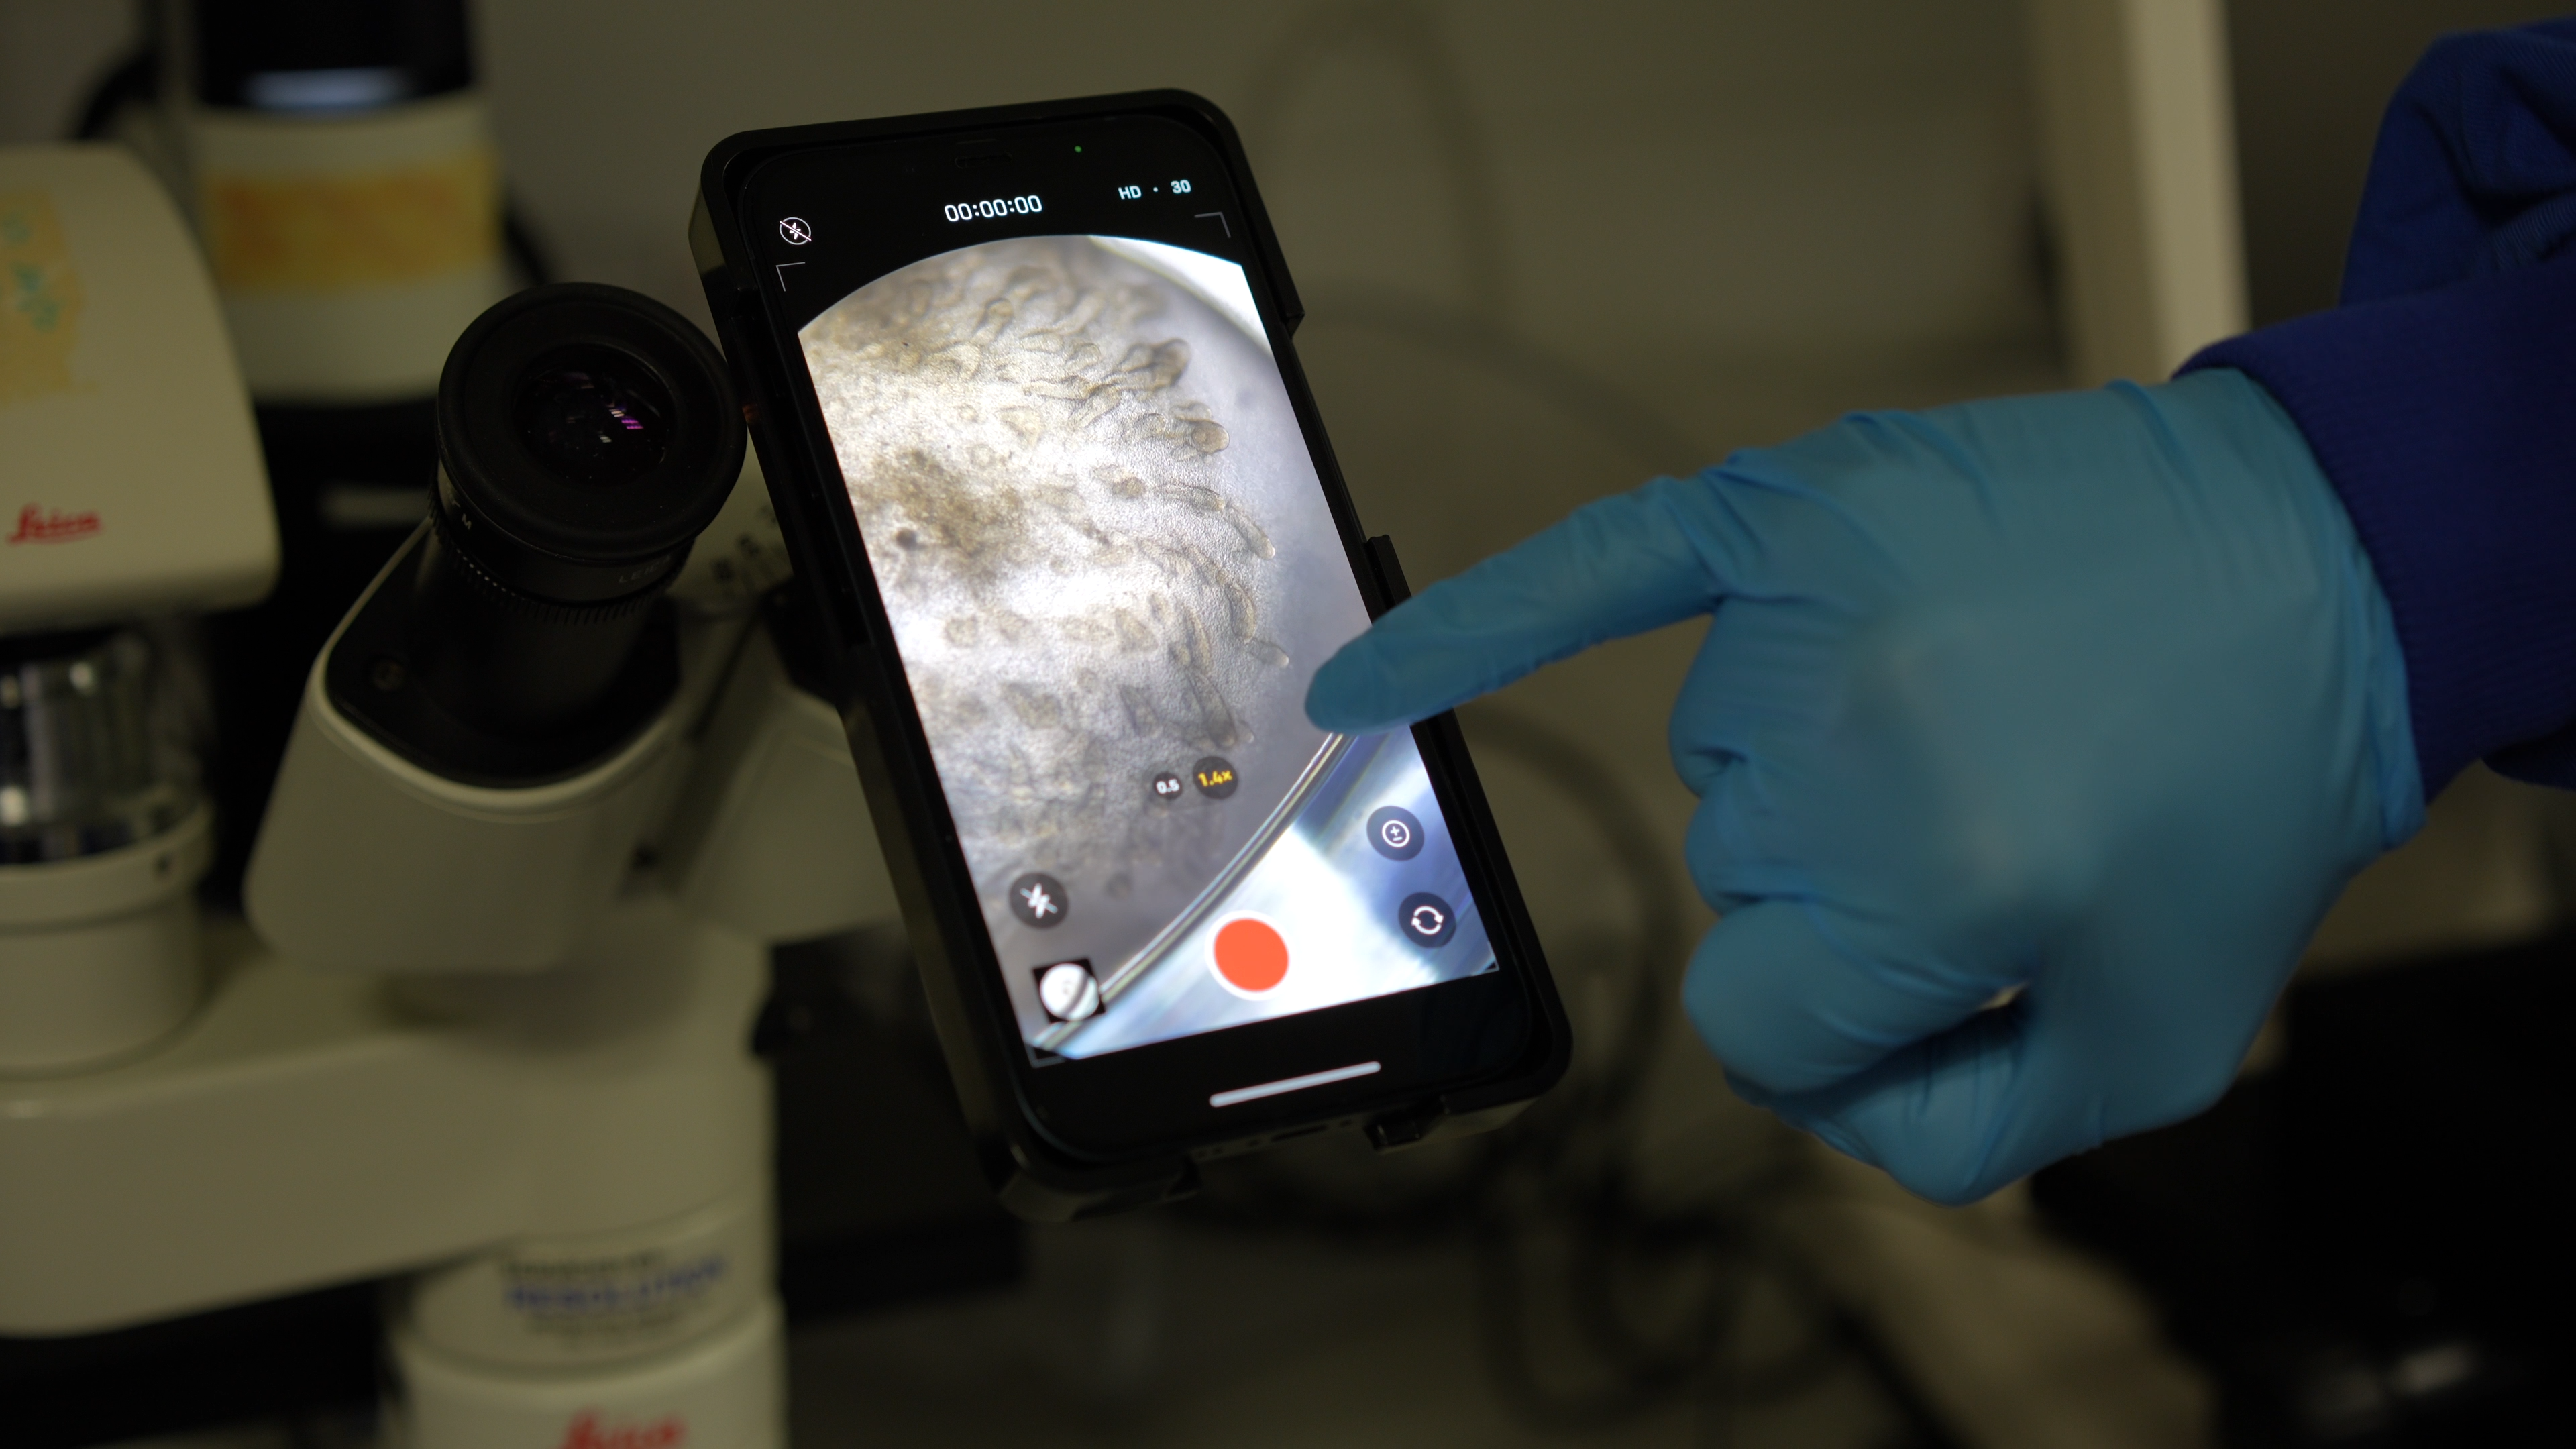 A smartphone is shown recording specimen from a microscope. A hand is pointing at the screen.